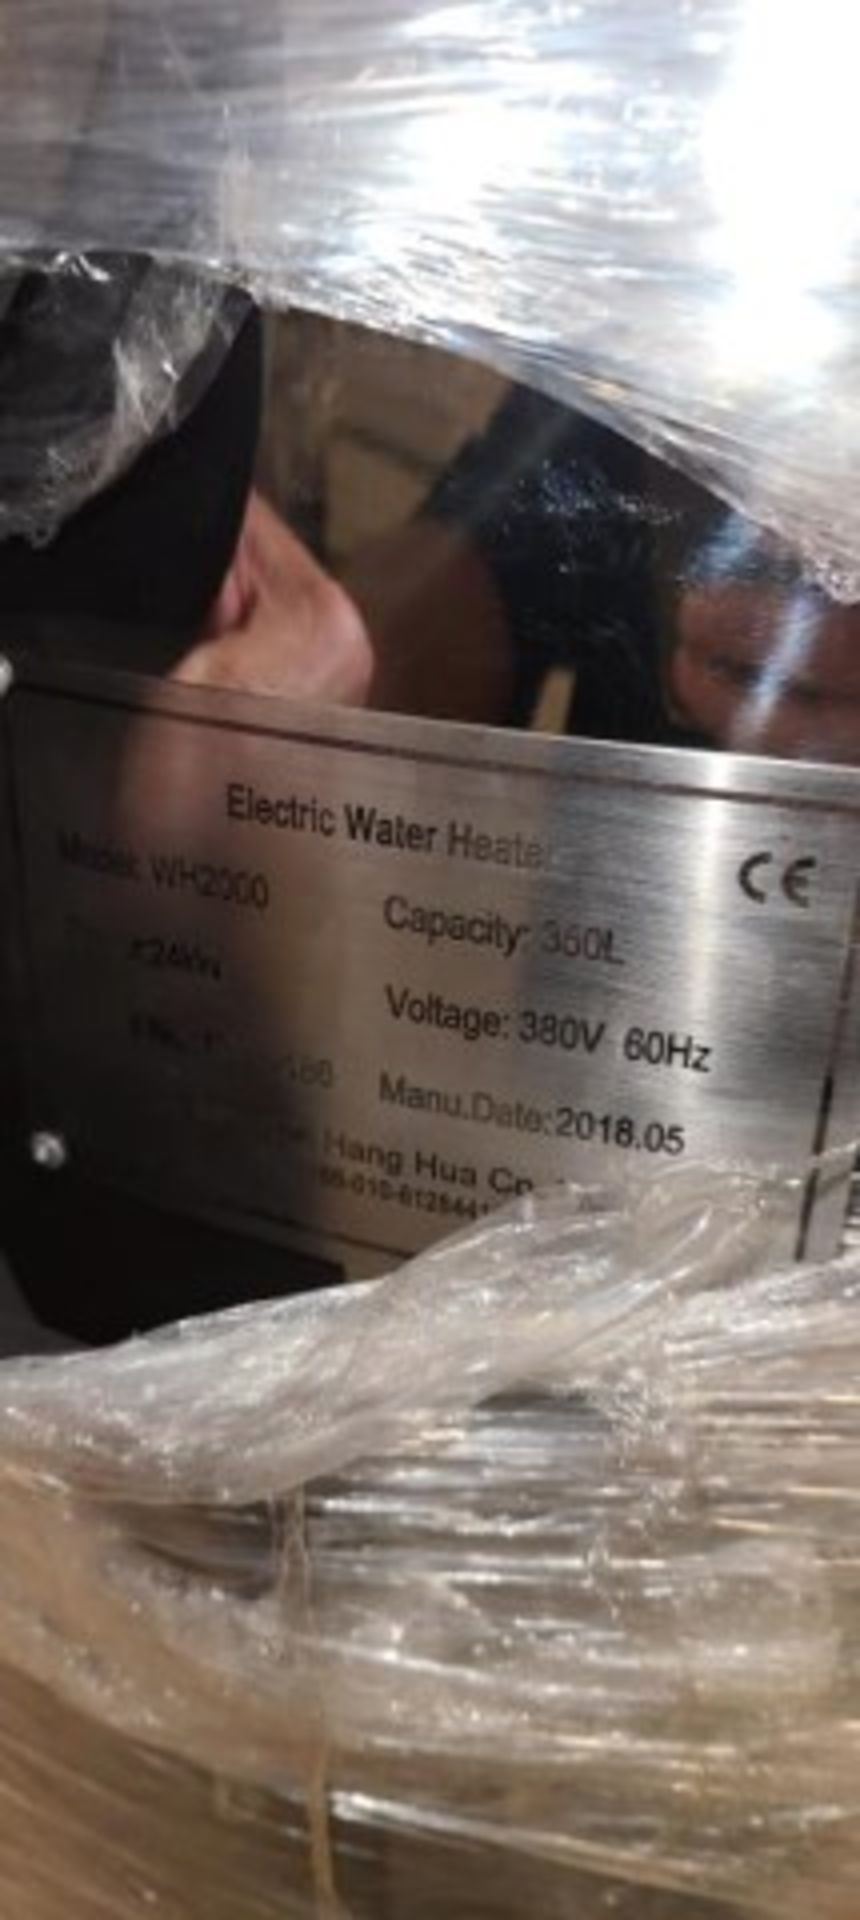 Electric Water Heater - Image 2 of 2